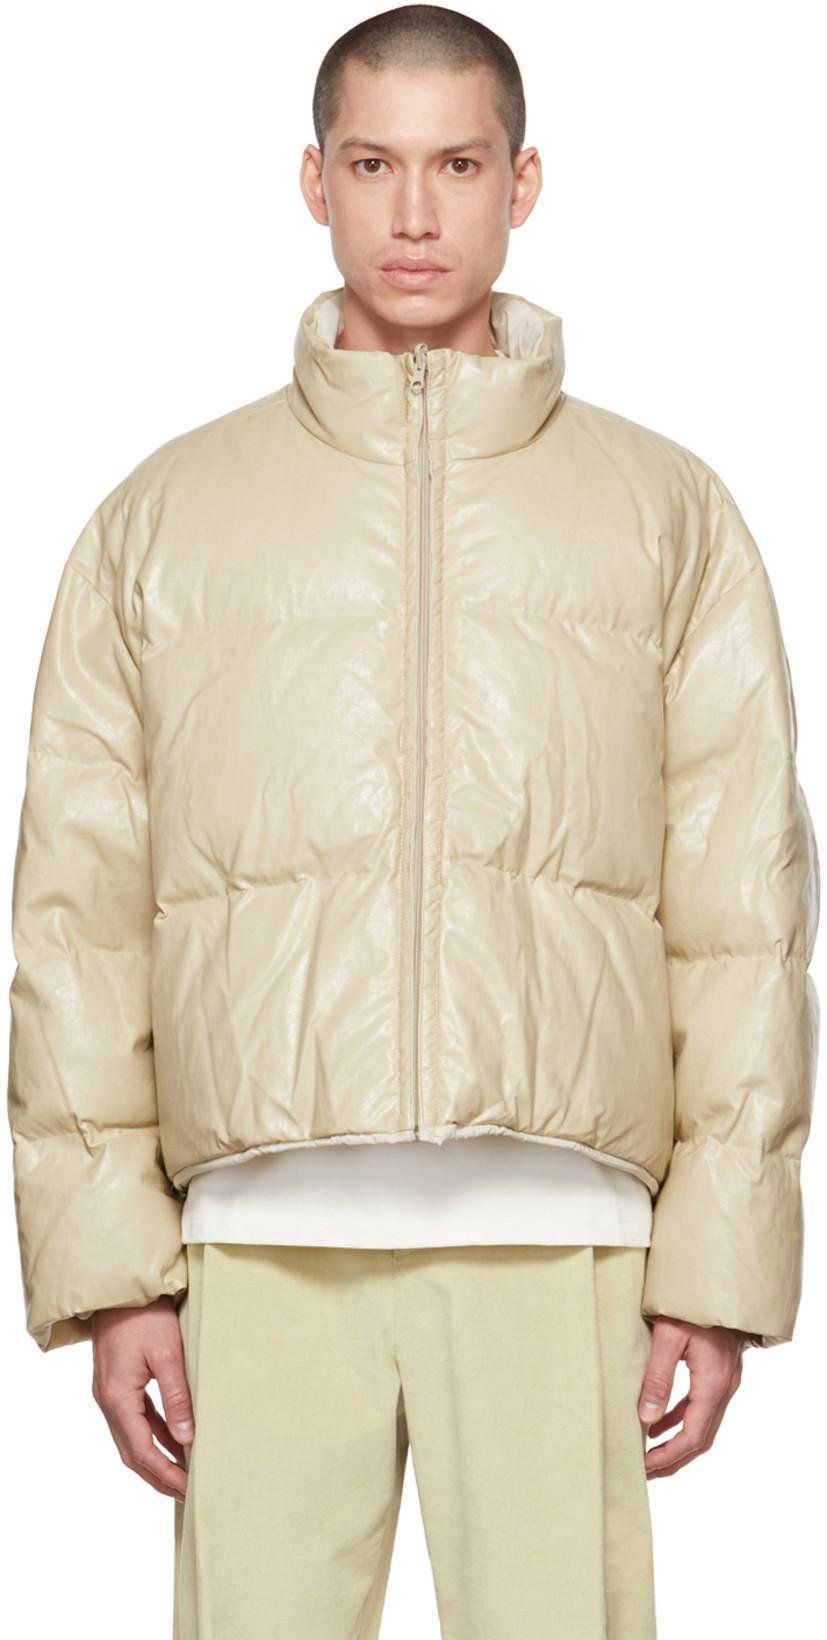 Beige Grained Faux-Leather Down Jacket by AMOMENTO